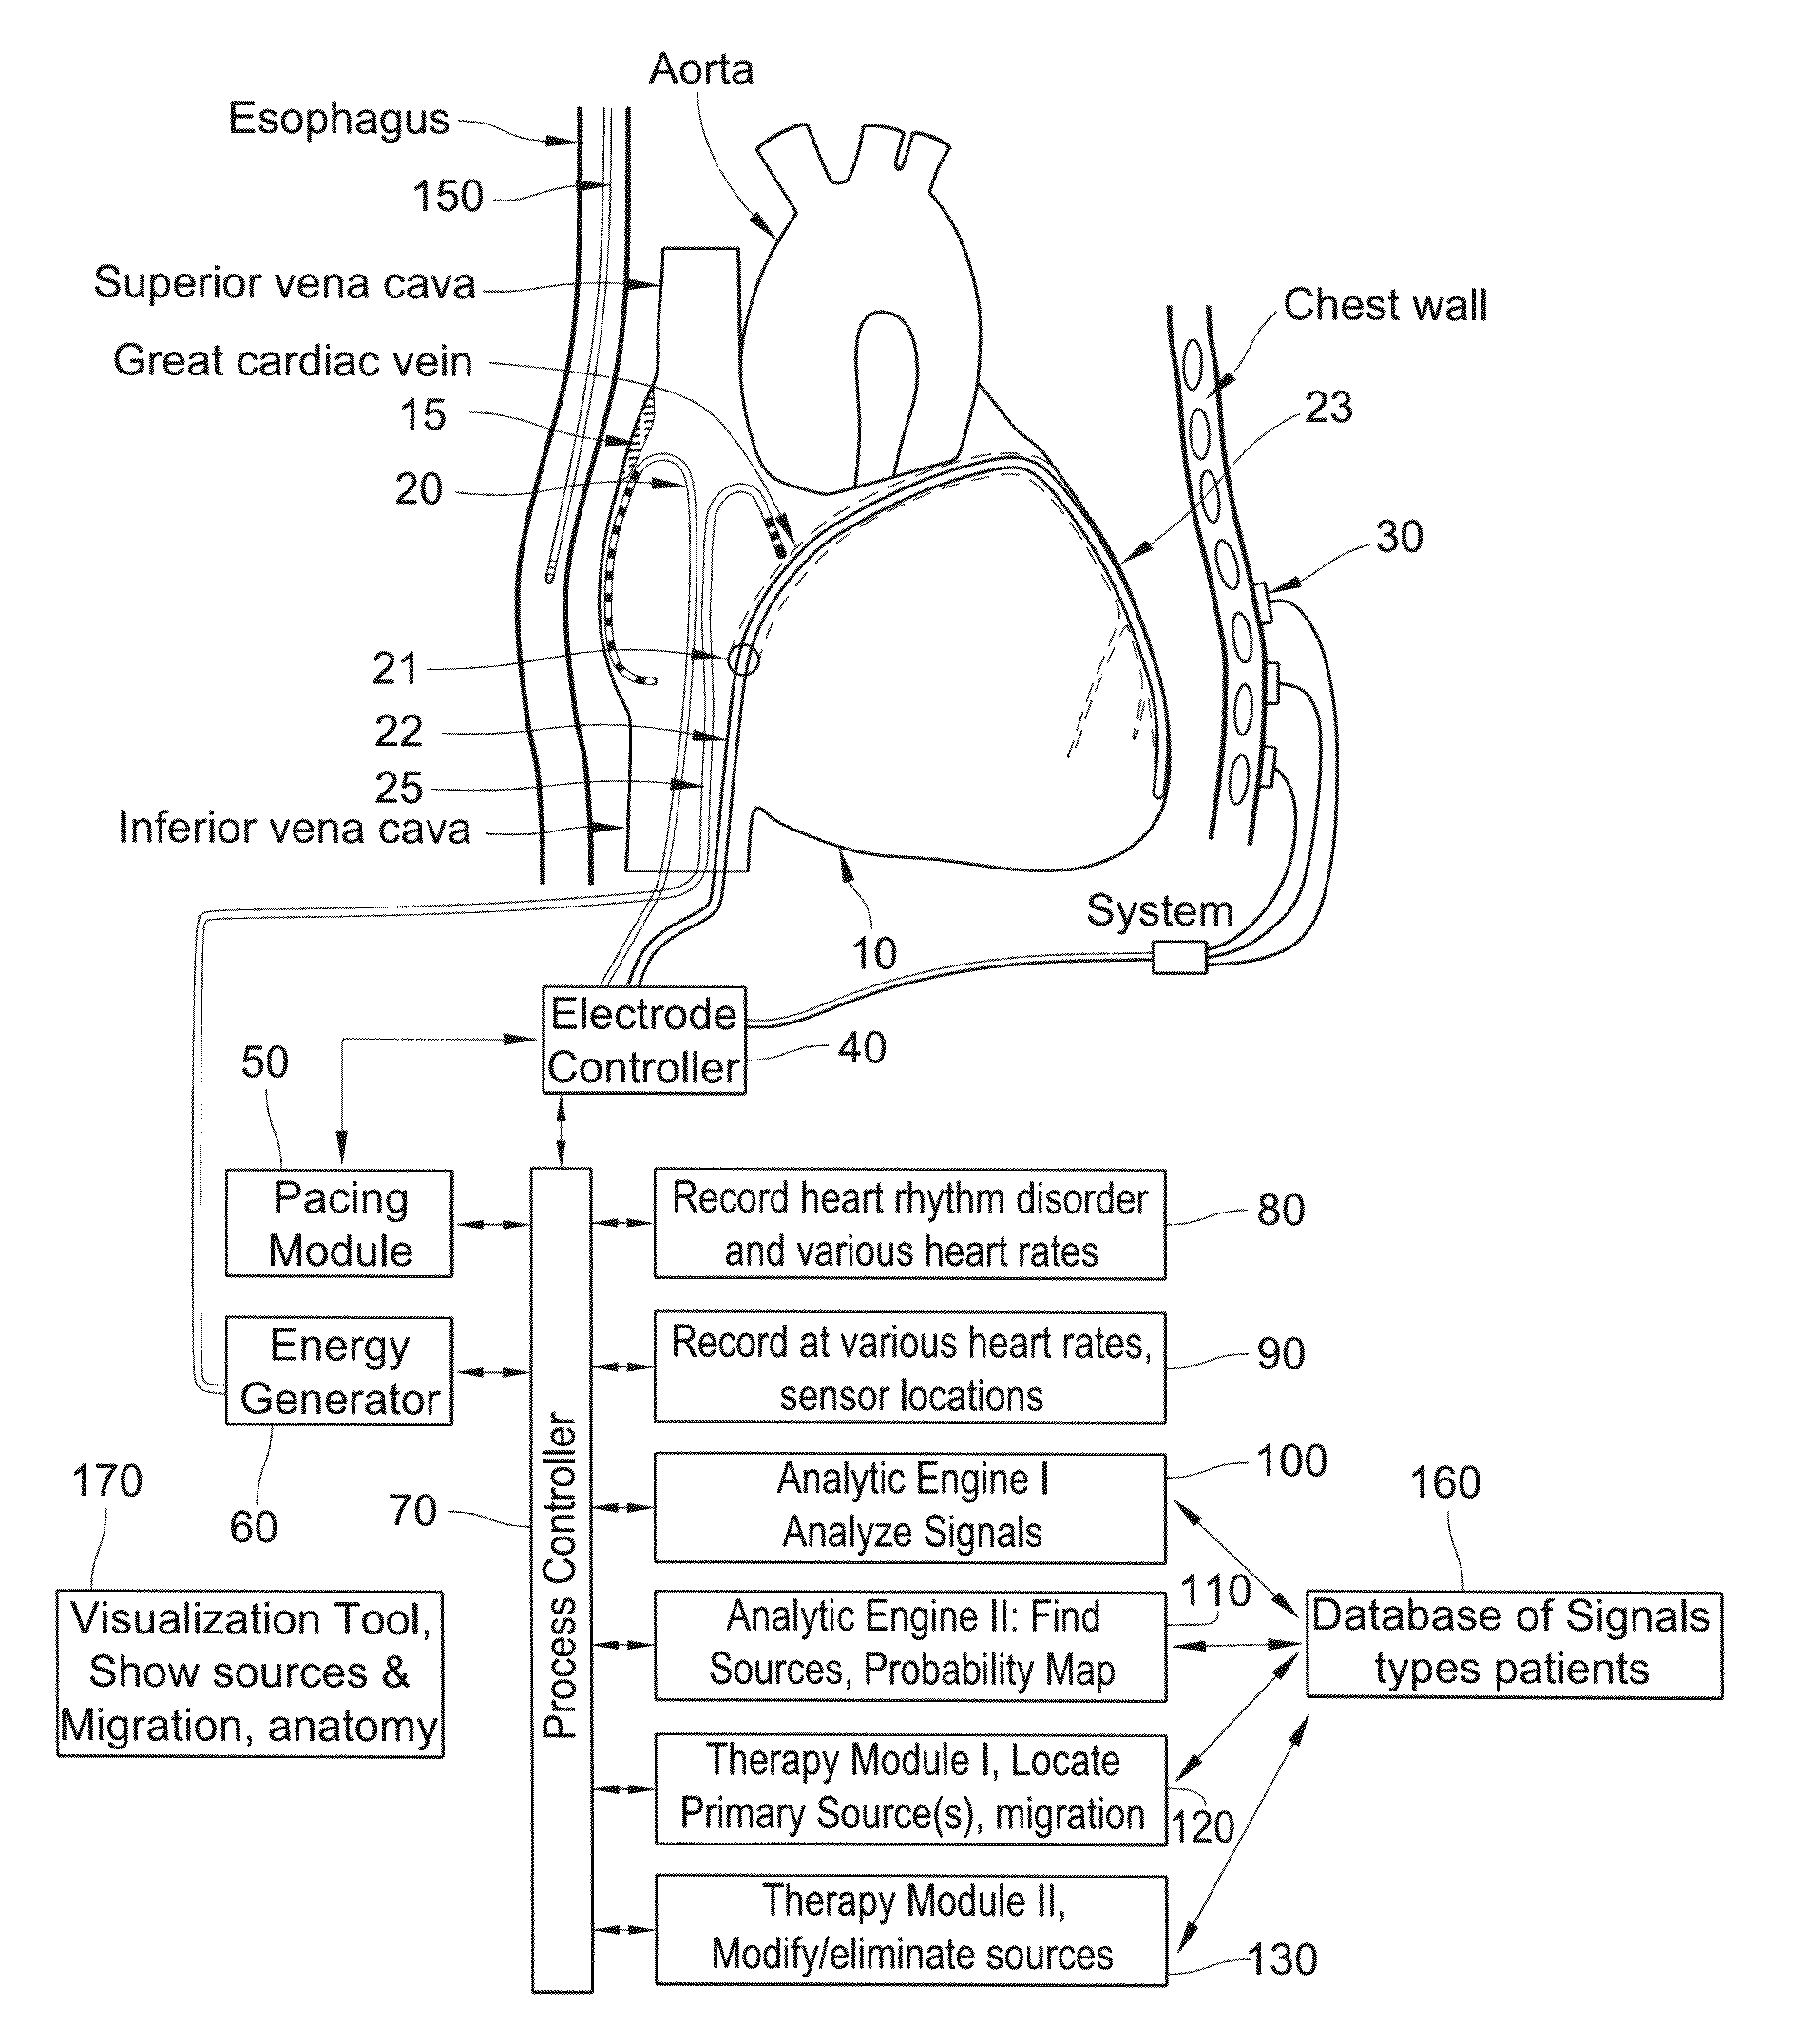 Methods for the detection and/or diagnosis of biological rhythm disorders